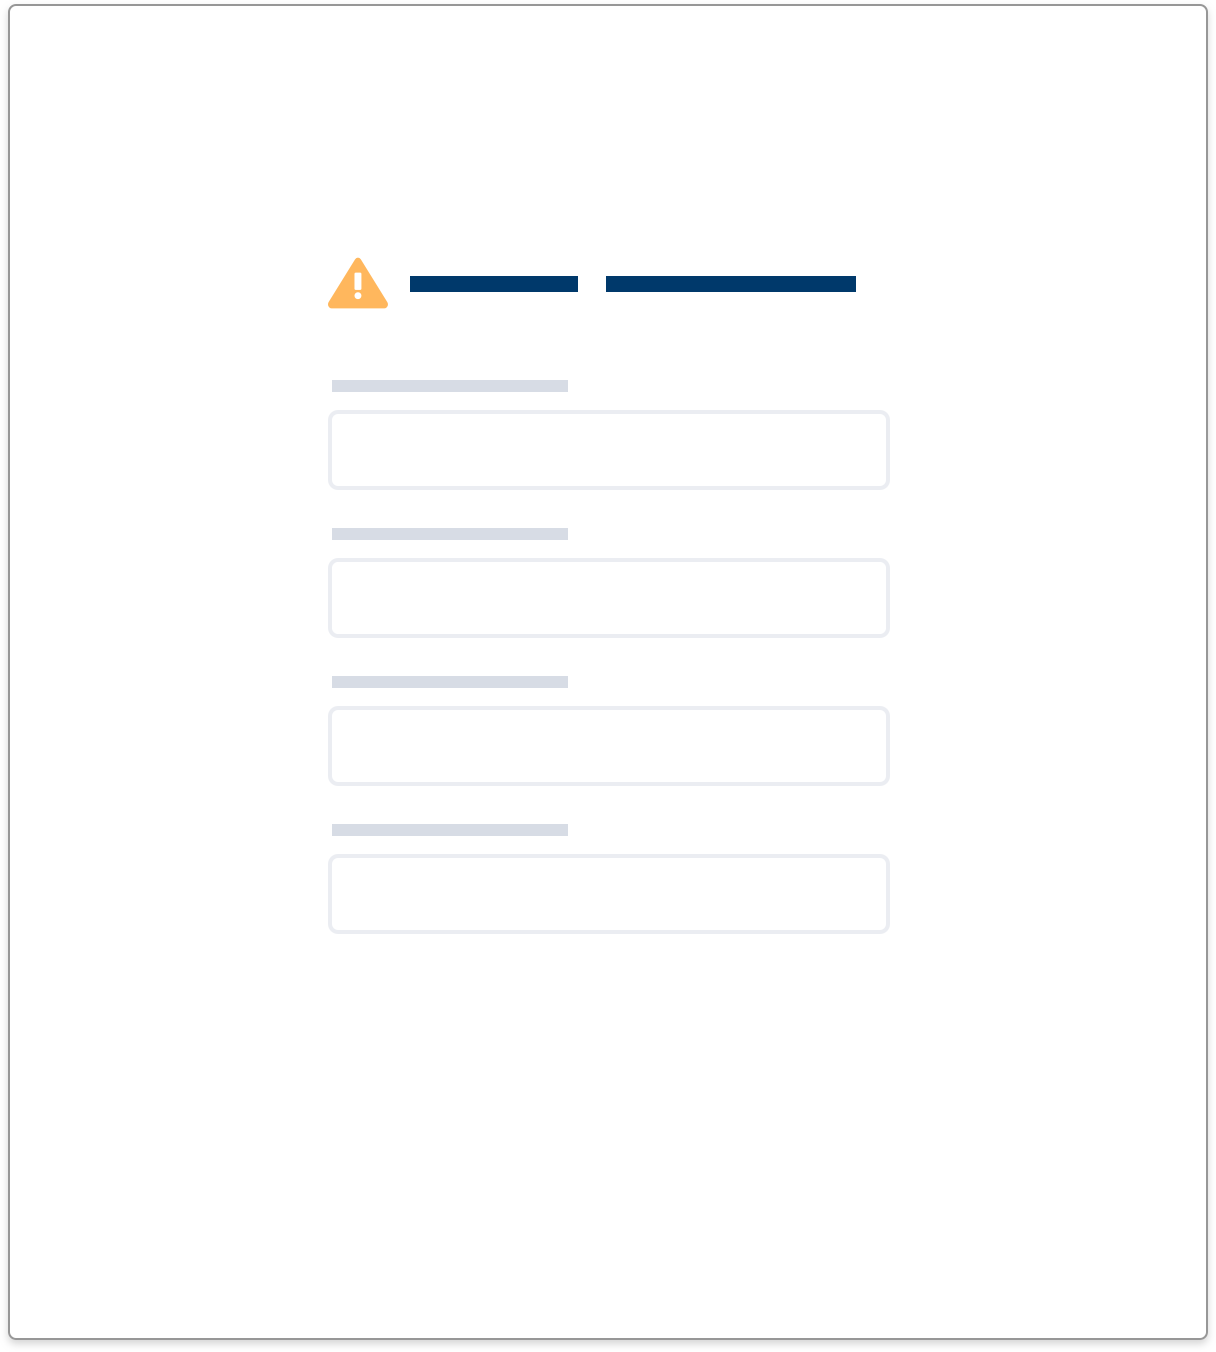 A wireframe showing an example of an icon variant inline text warning on a form.